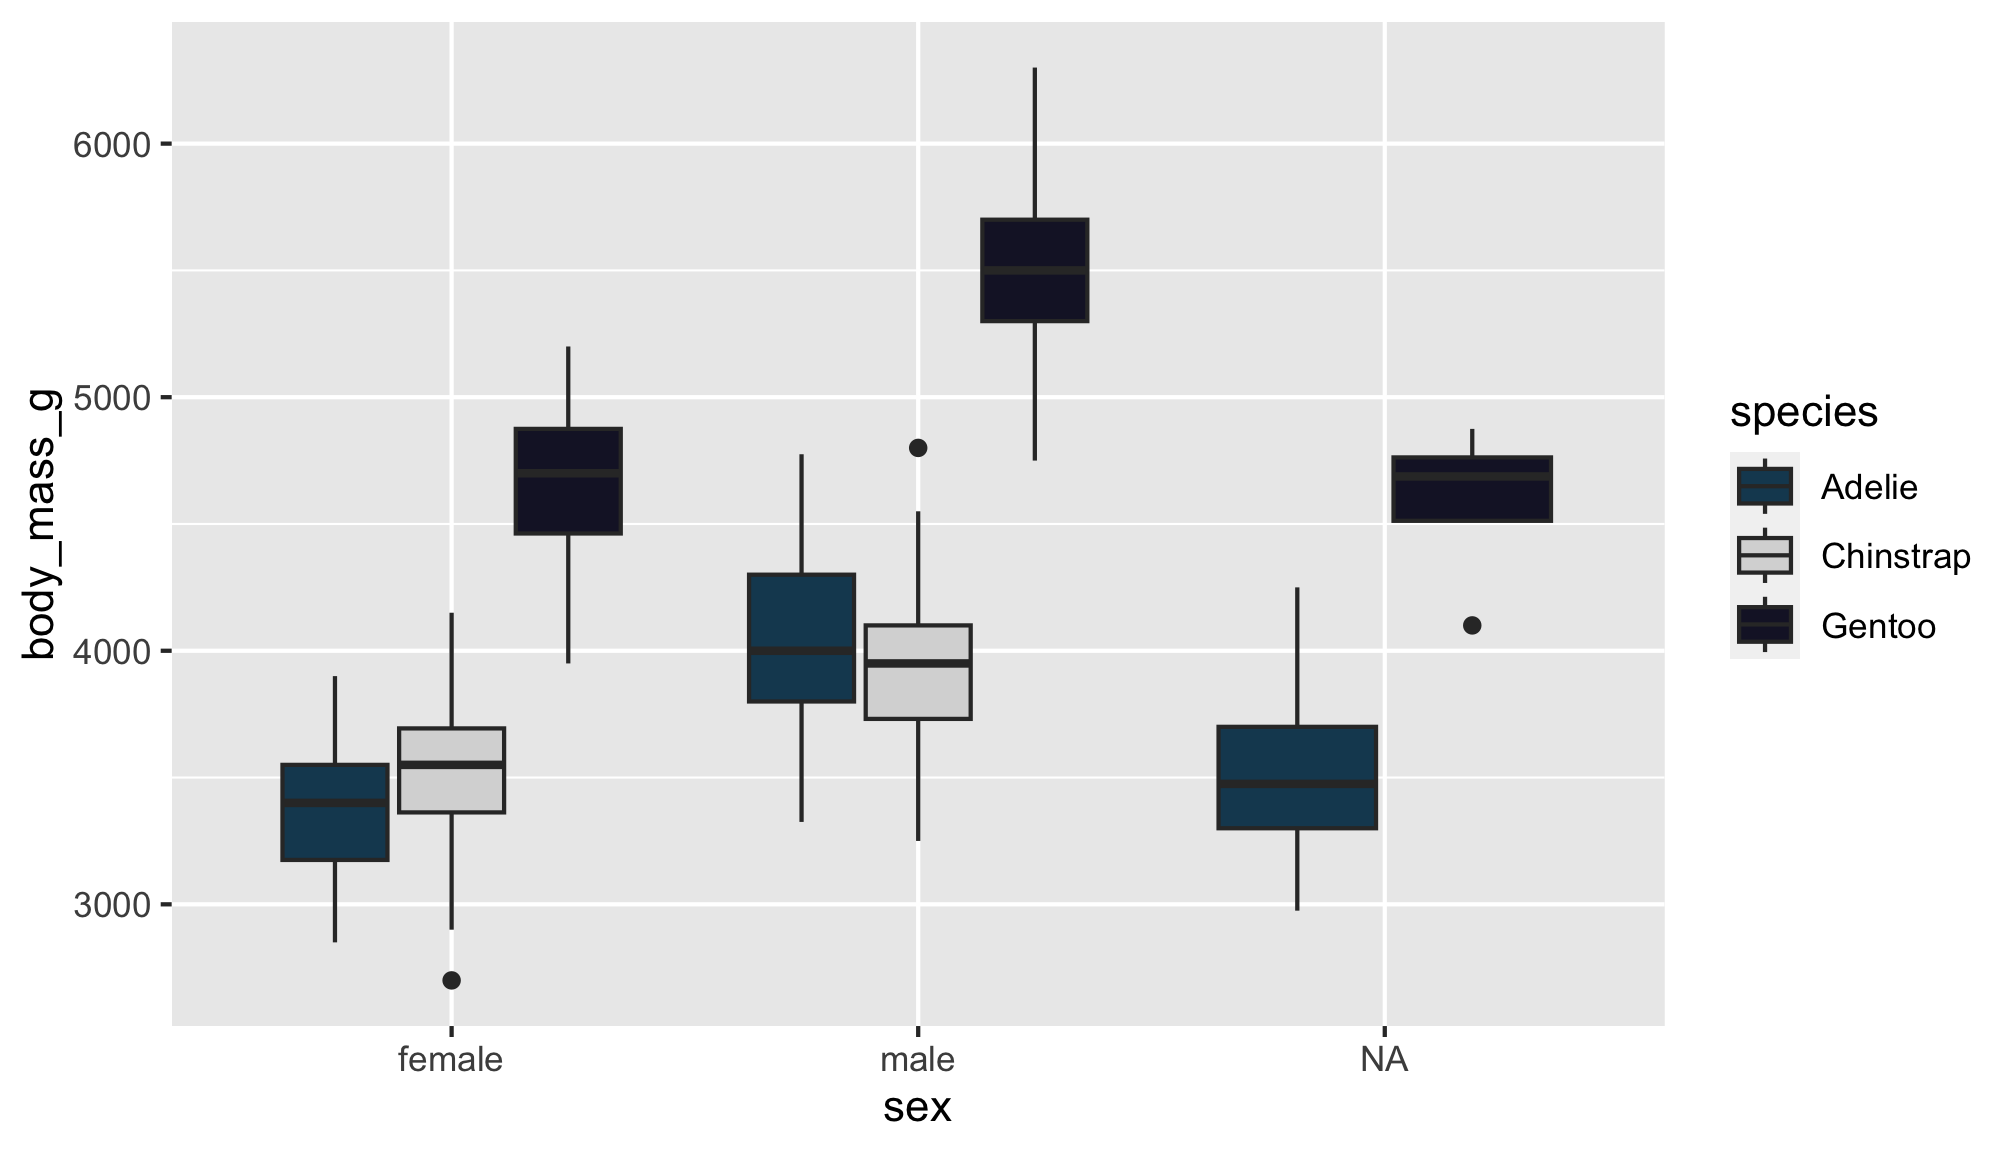 Our boxplot filled with nordic colors. Gentoo boxplots are a dark purple, Adélie boxplots are a dark teal, and Chinstrap boxplots are a snowy white.